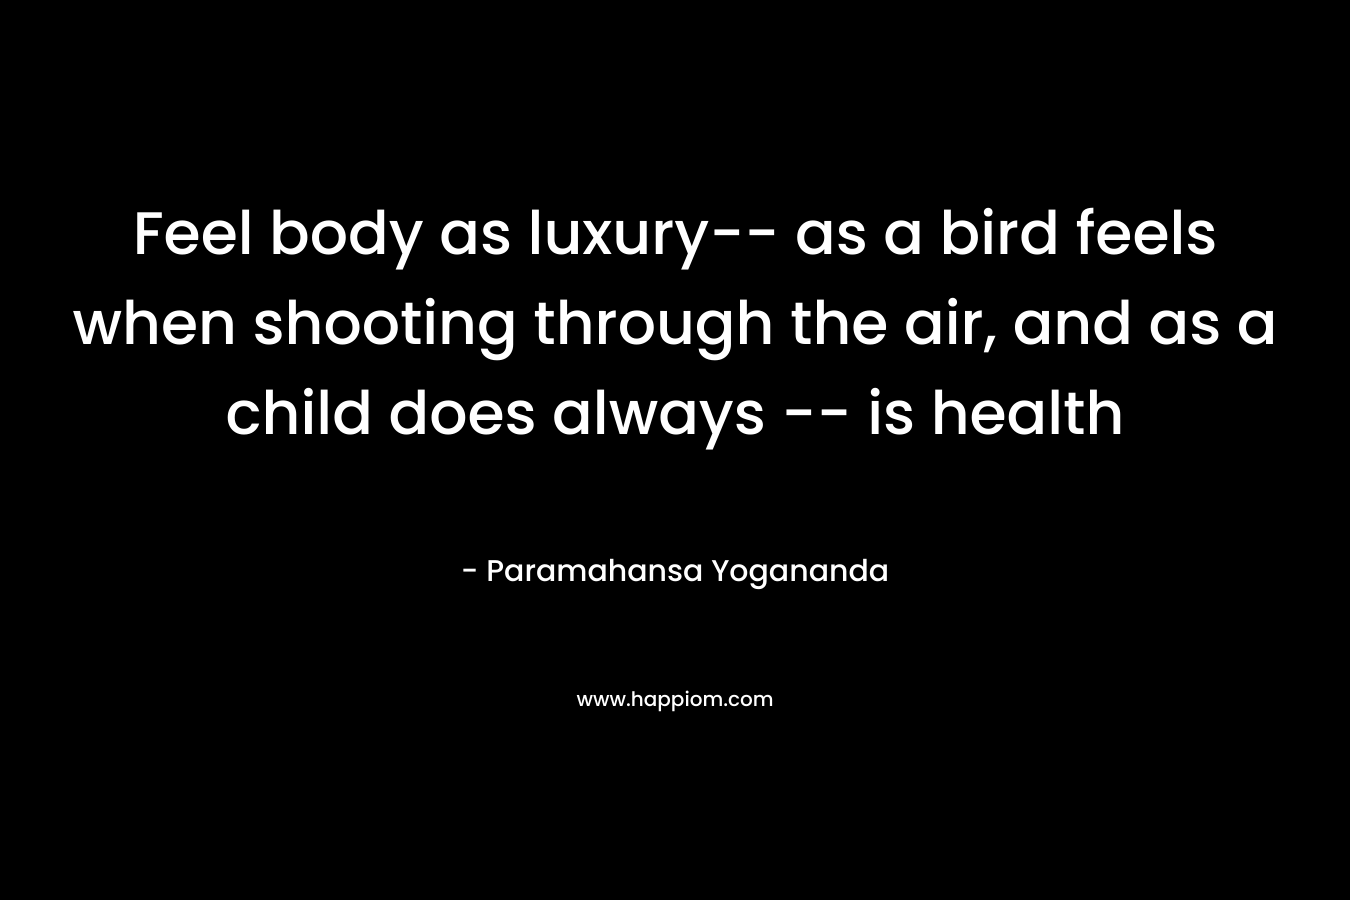 Feel body as luxury-- as a bird feels when shooting through the air, and as a child does always -- is health